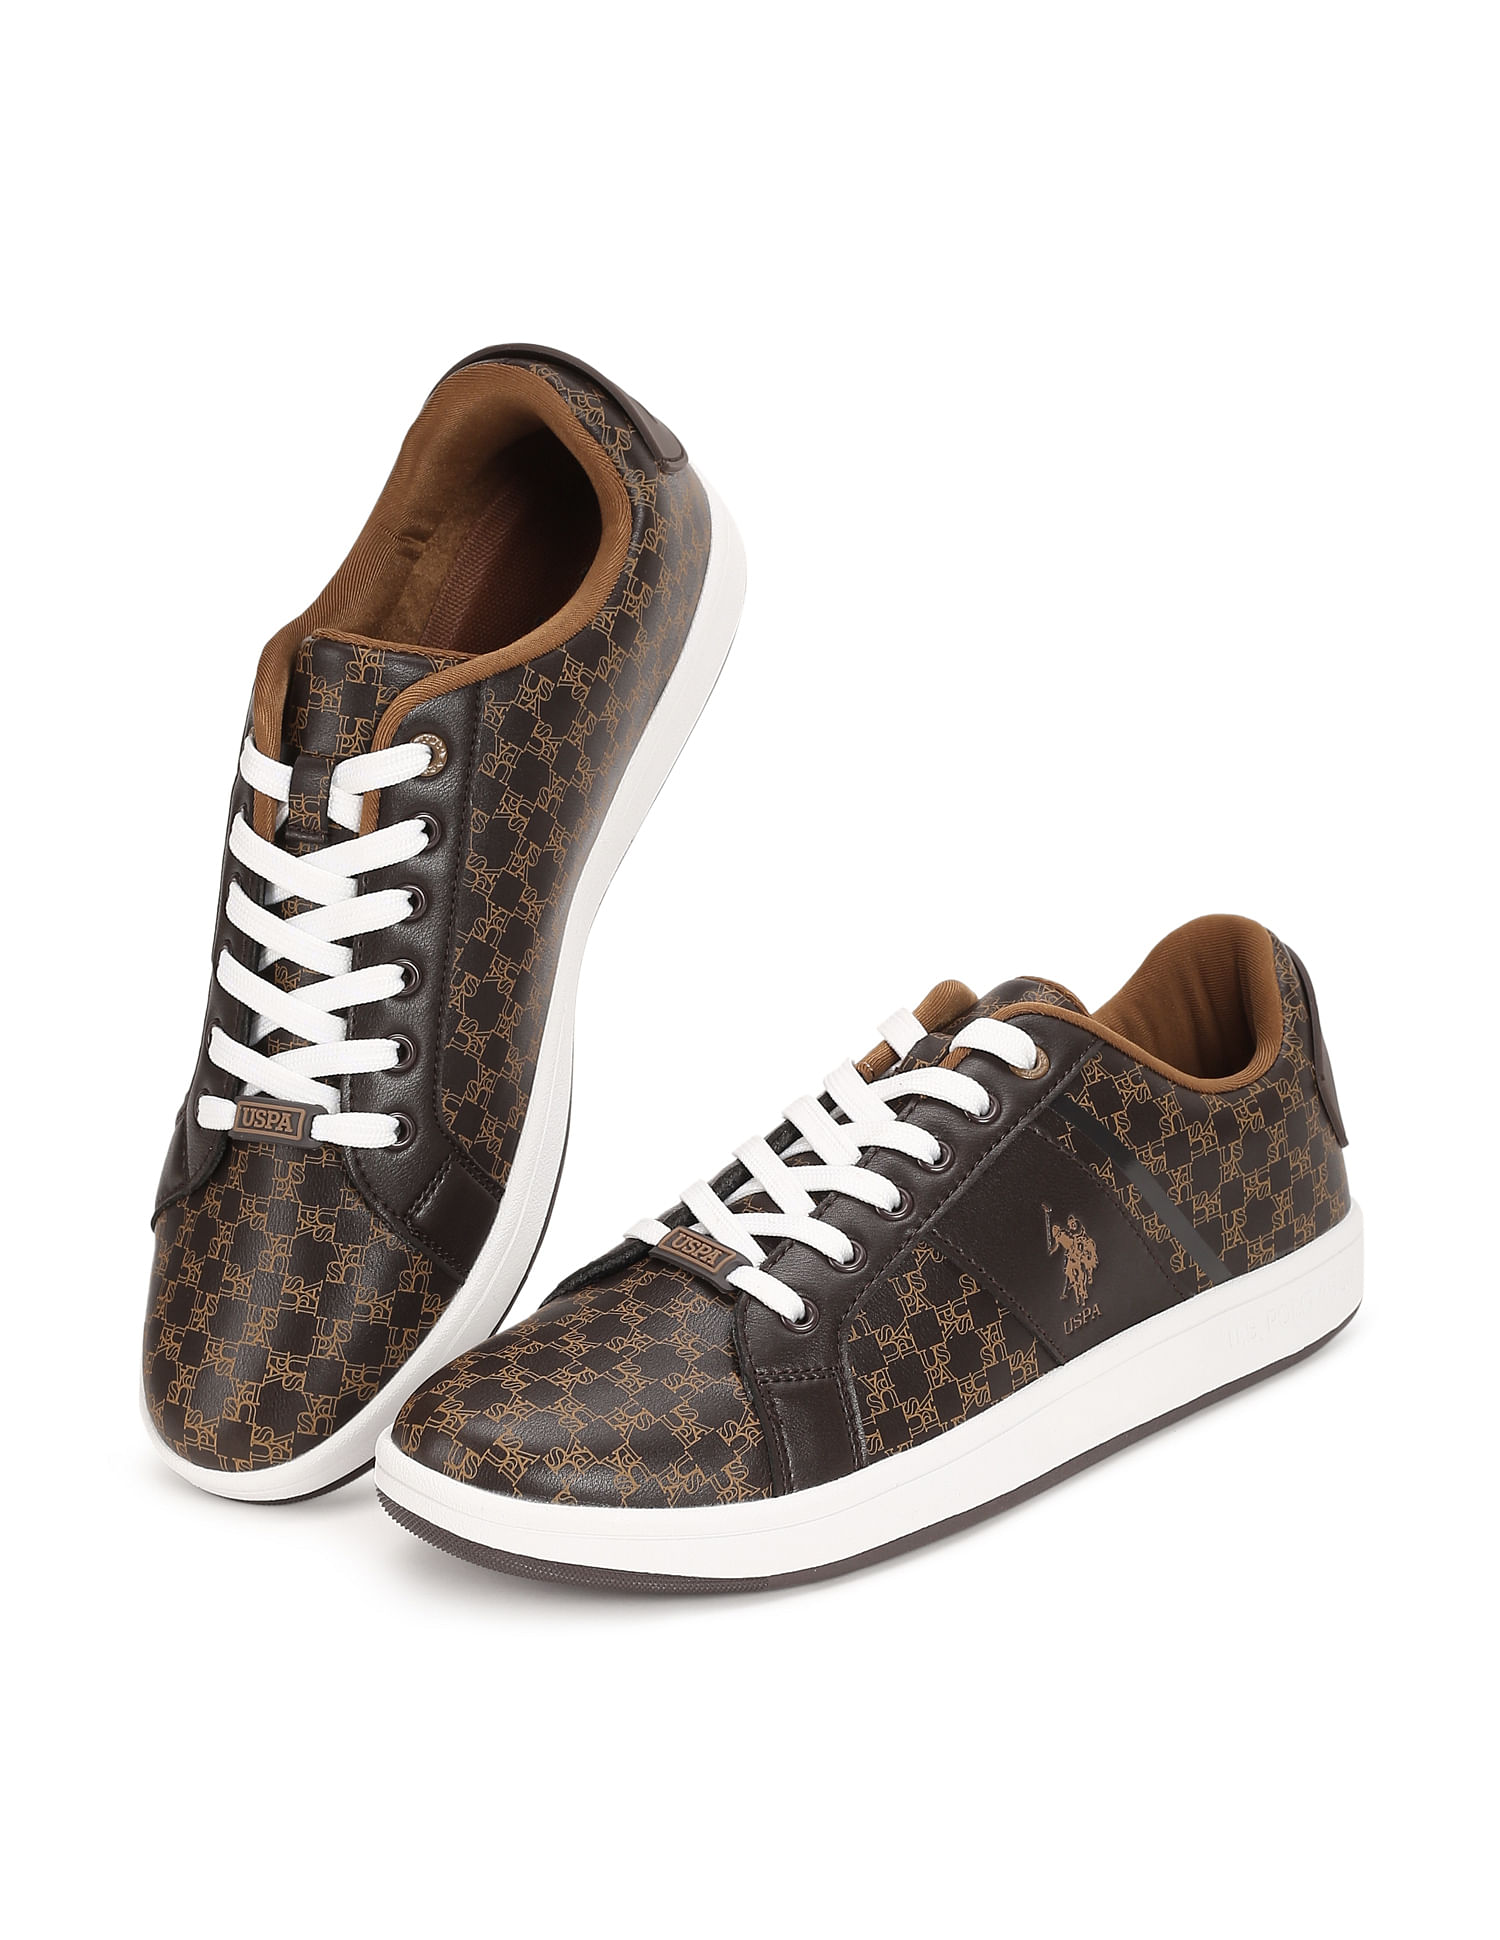 Buy men's shoes online at up to 60% off - Amazon.in